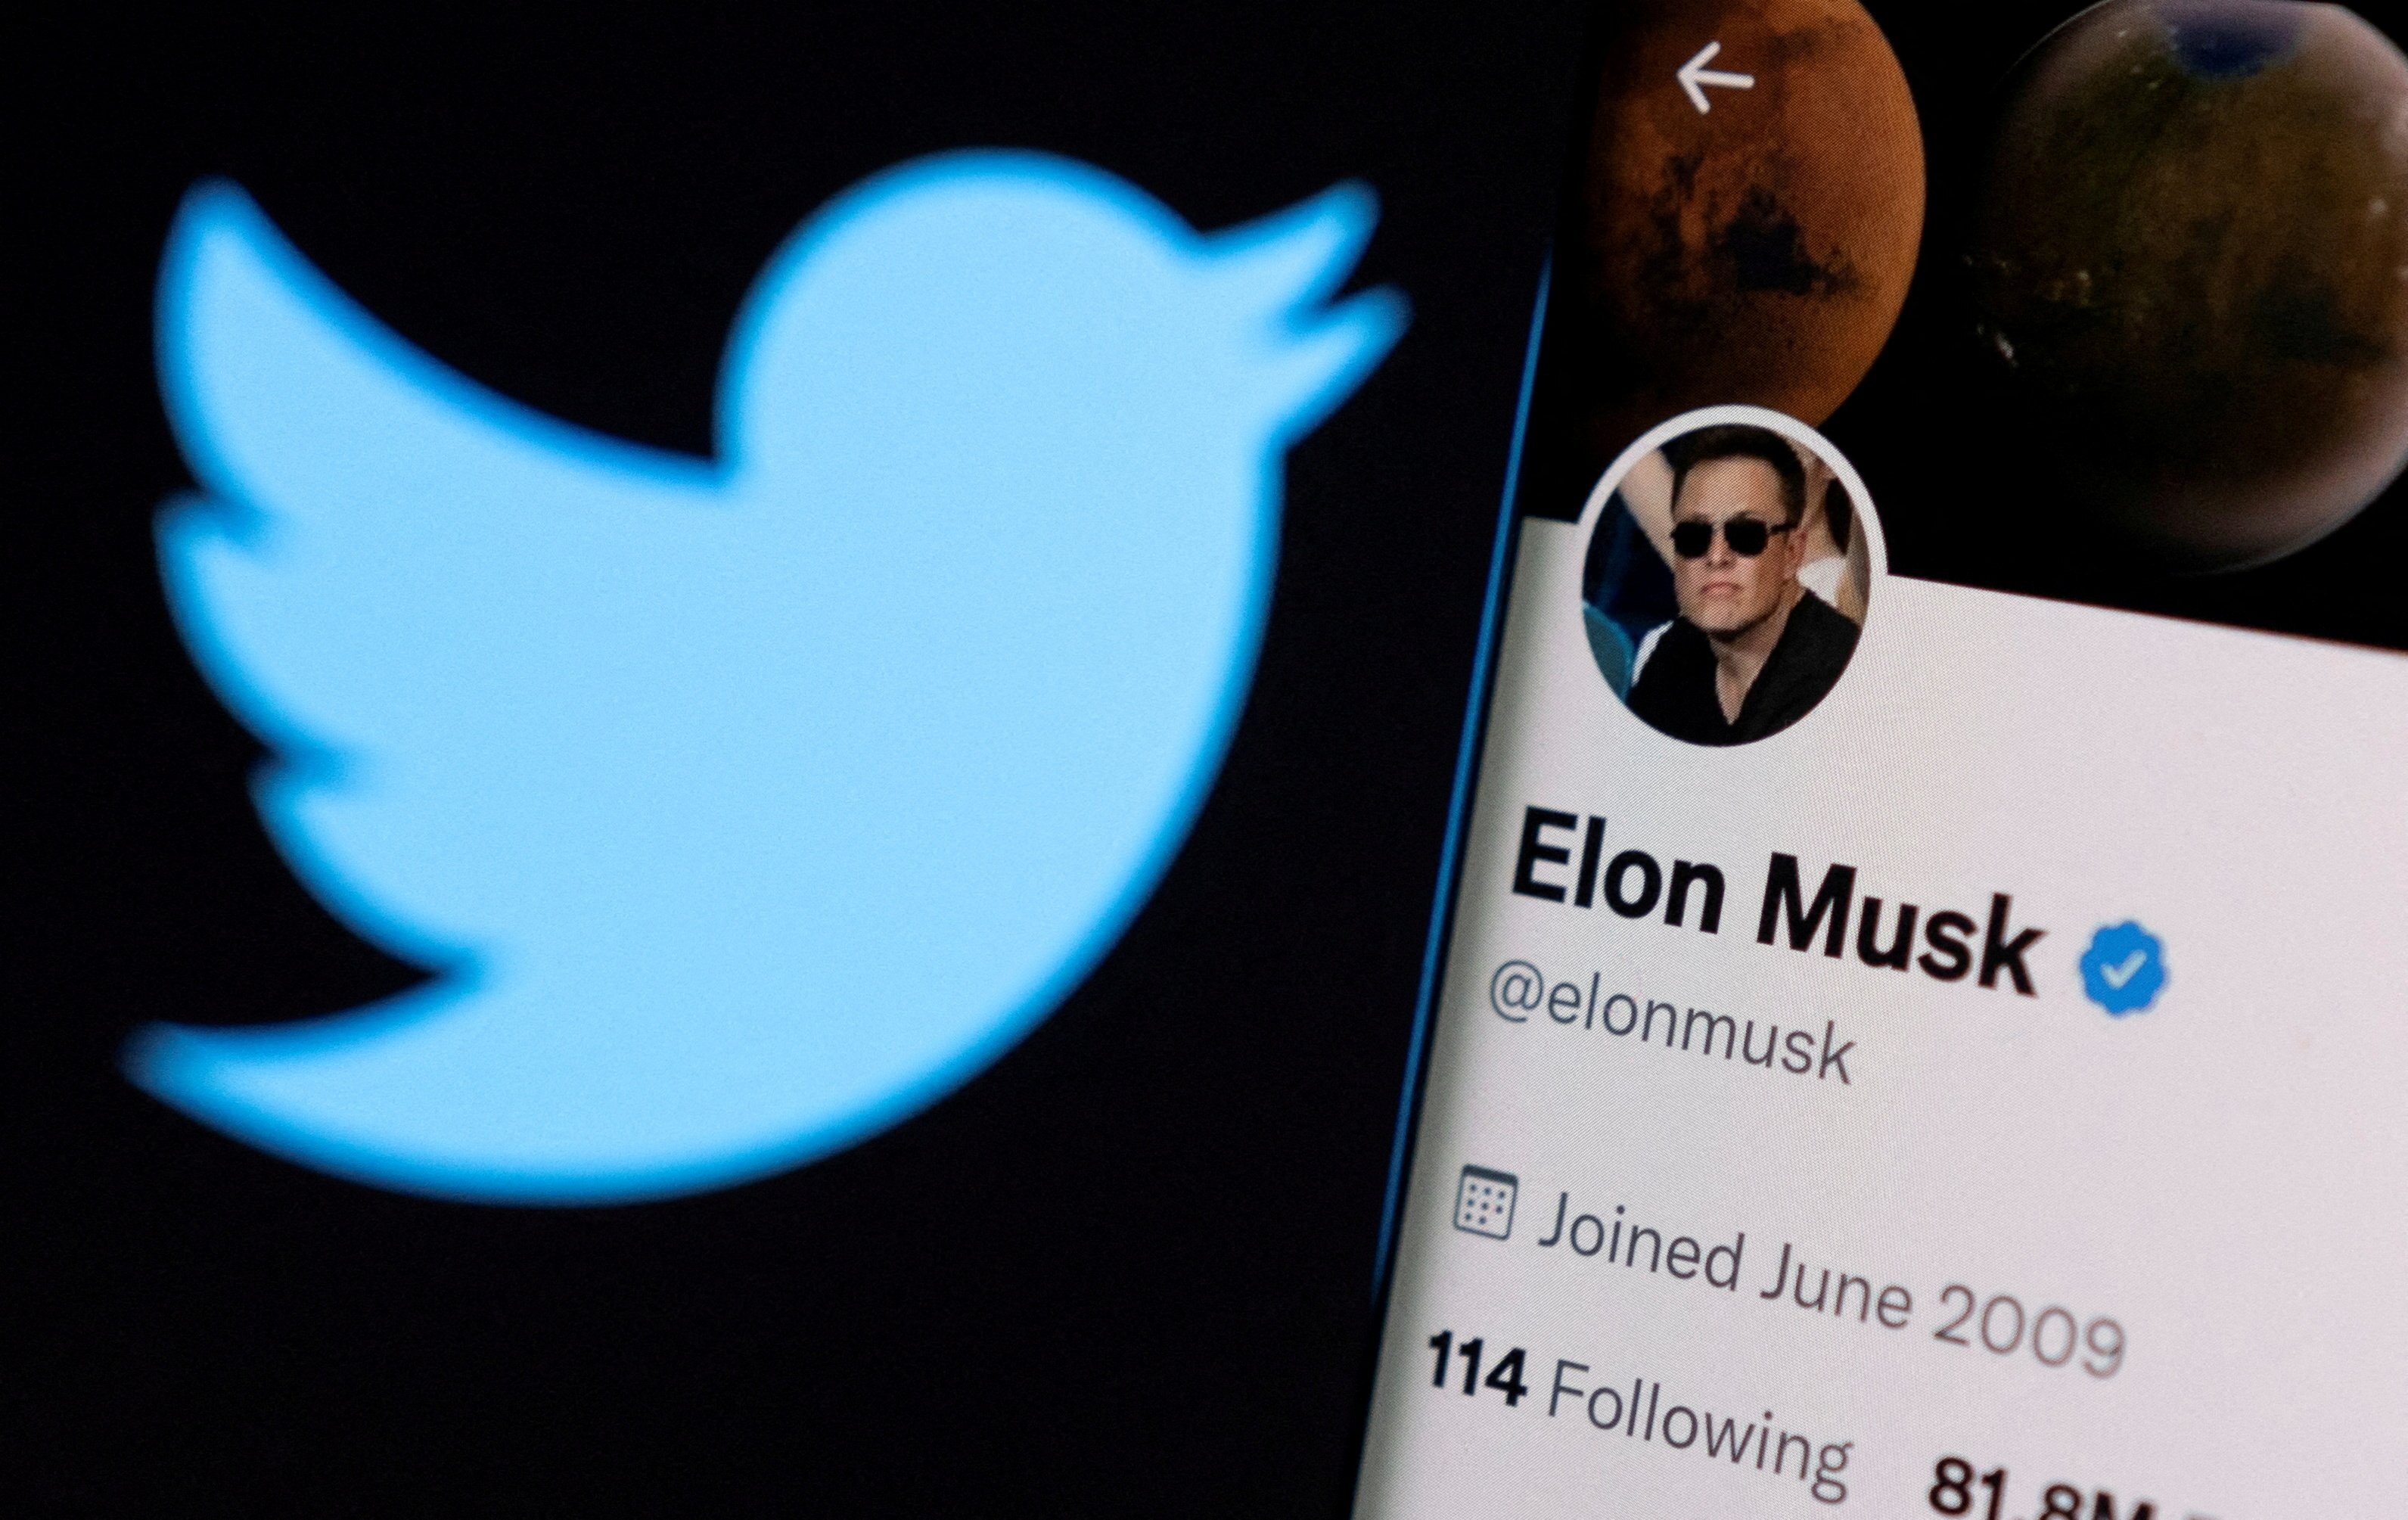 Elon Musk says he wants to ‘transform’ Twitter. Photo: Reuters